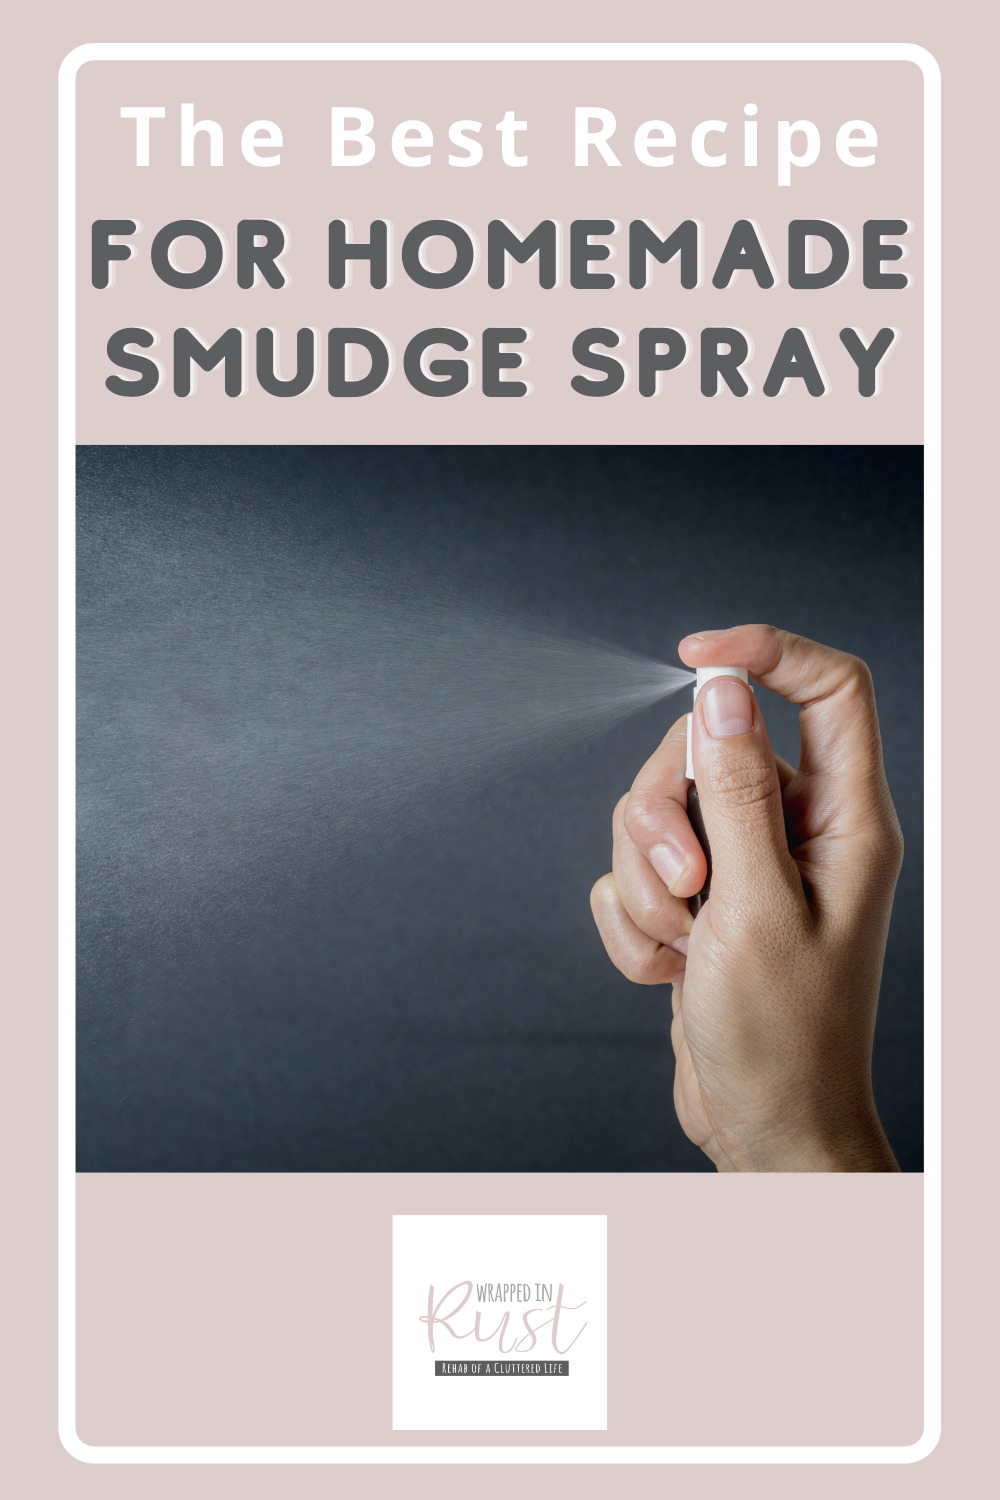 Wrappedinrust.com is the ultimate destination for ideas in home cleaning! Find creative ways to get the job done right away. Learn how to make your very own smudge spray at home!